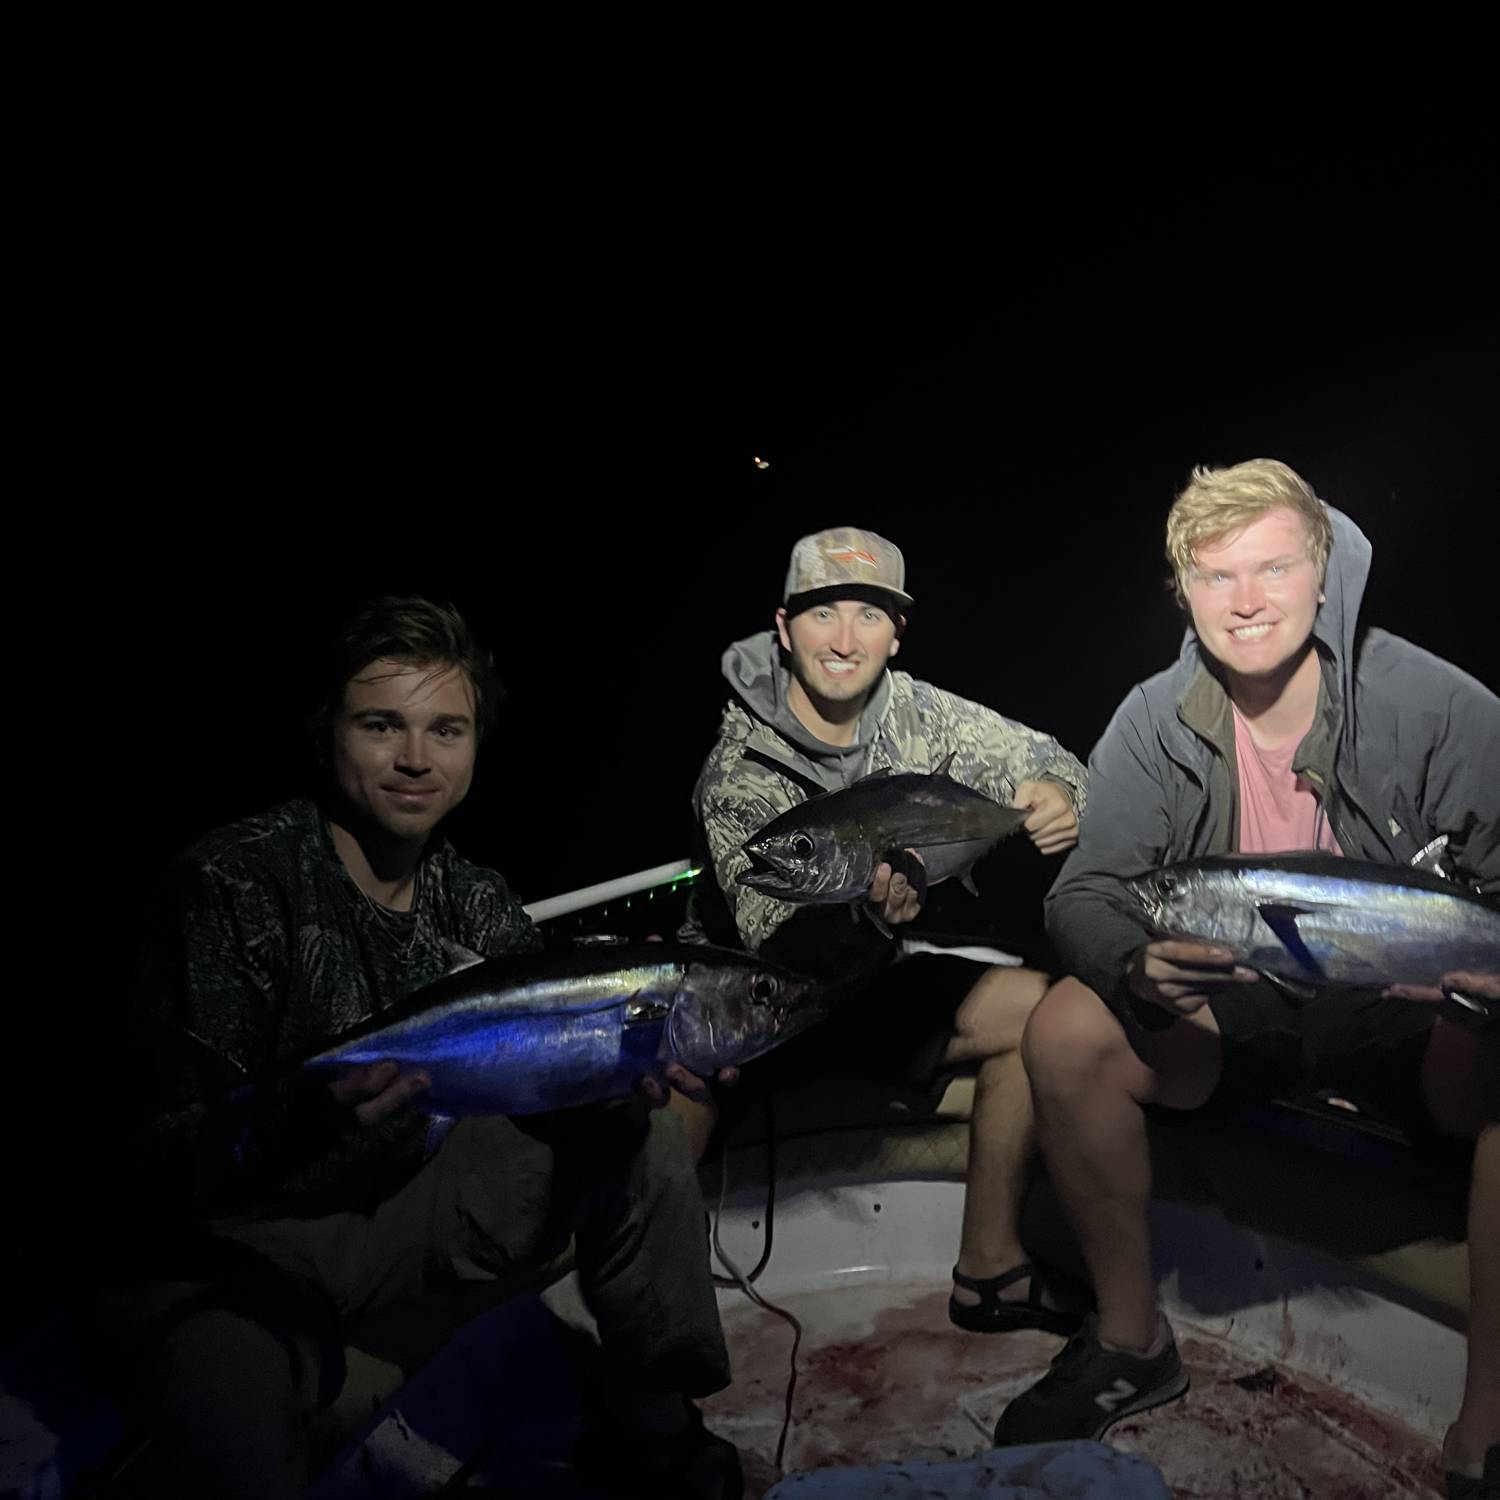 Took an overnight trip to the floaters and caught blackfin until our arms went numb.